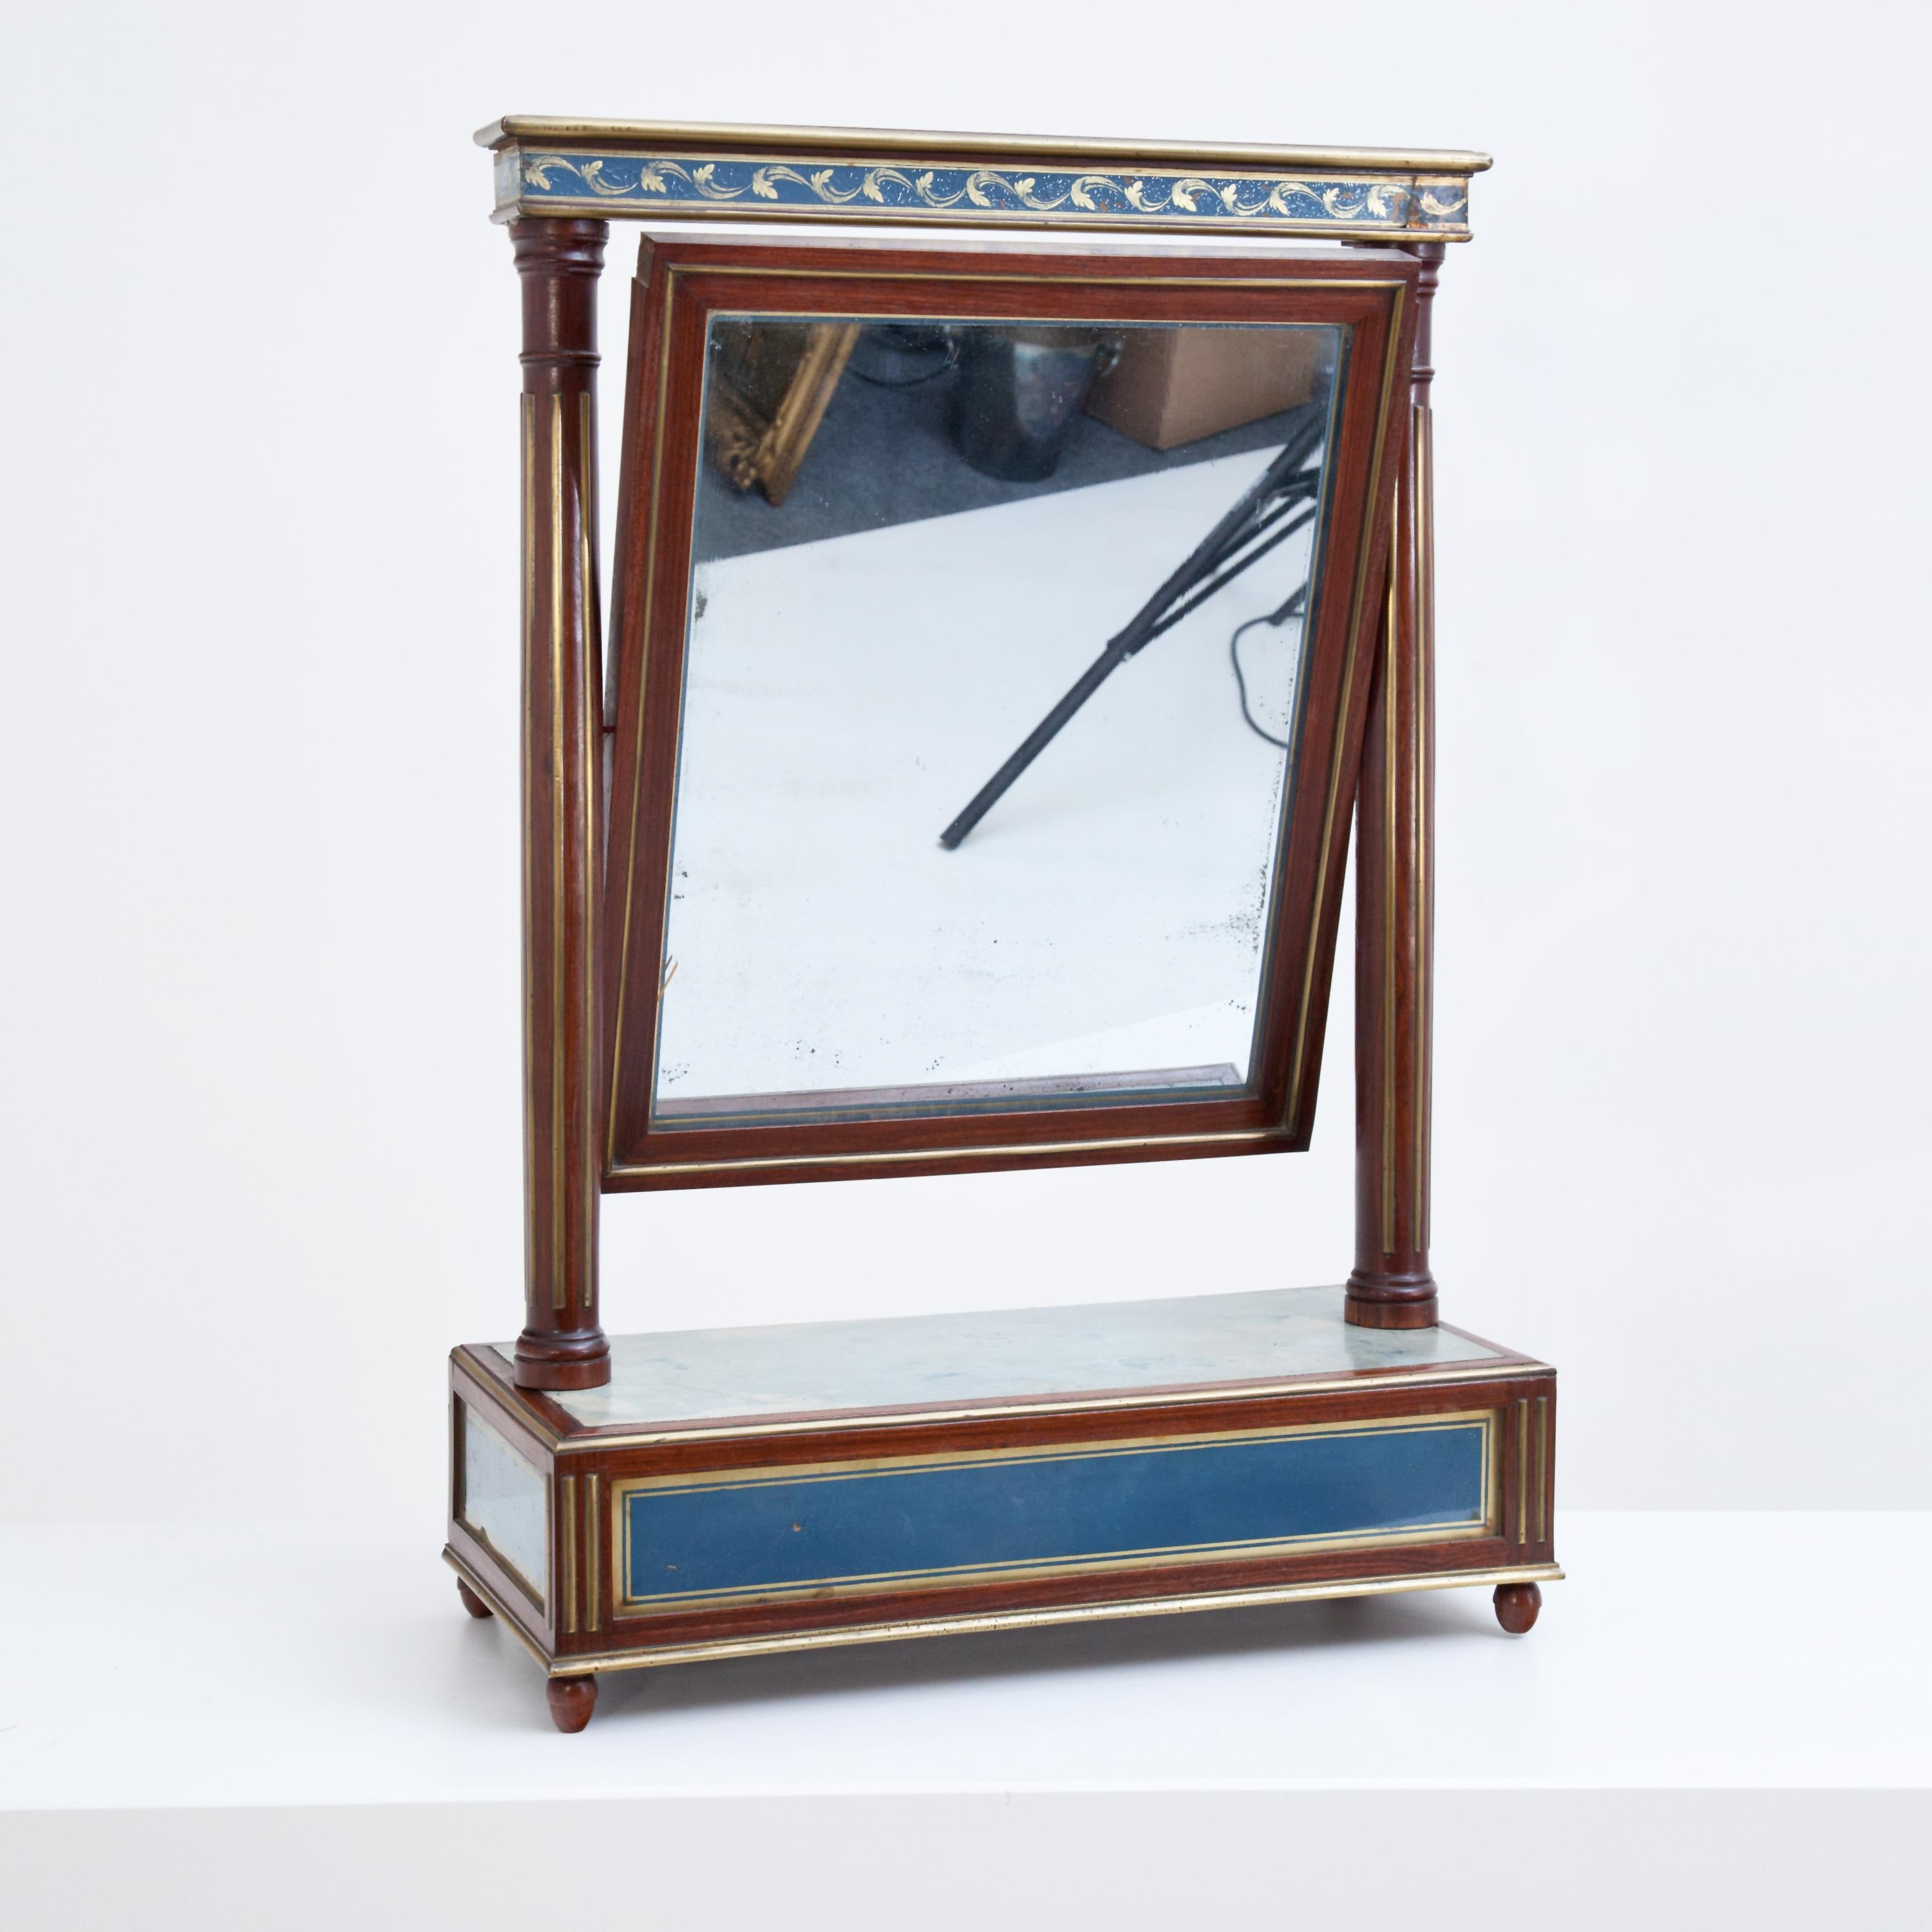 Classicist table mirror in mahogany with verre églomisé inlays in blue and gold. The mirror is mounted between fluted columns with straight architrave and pivots.